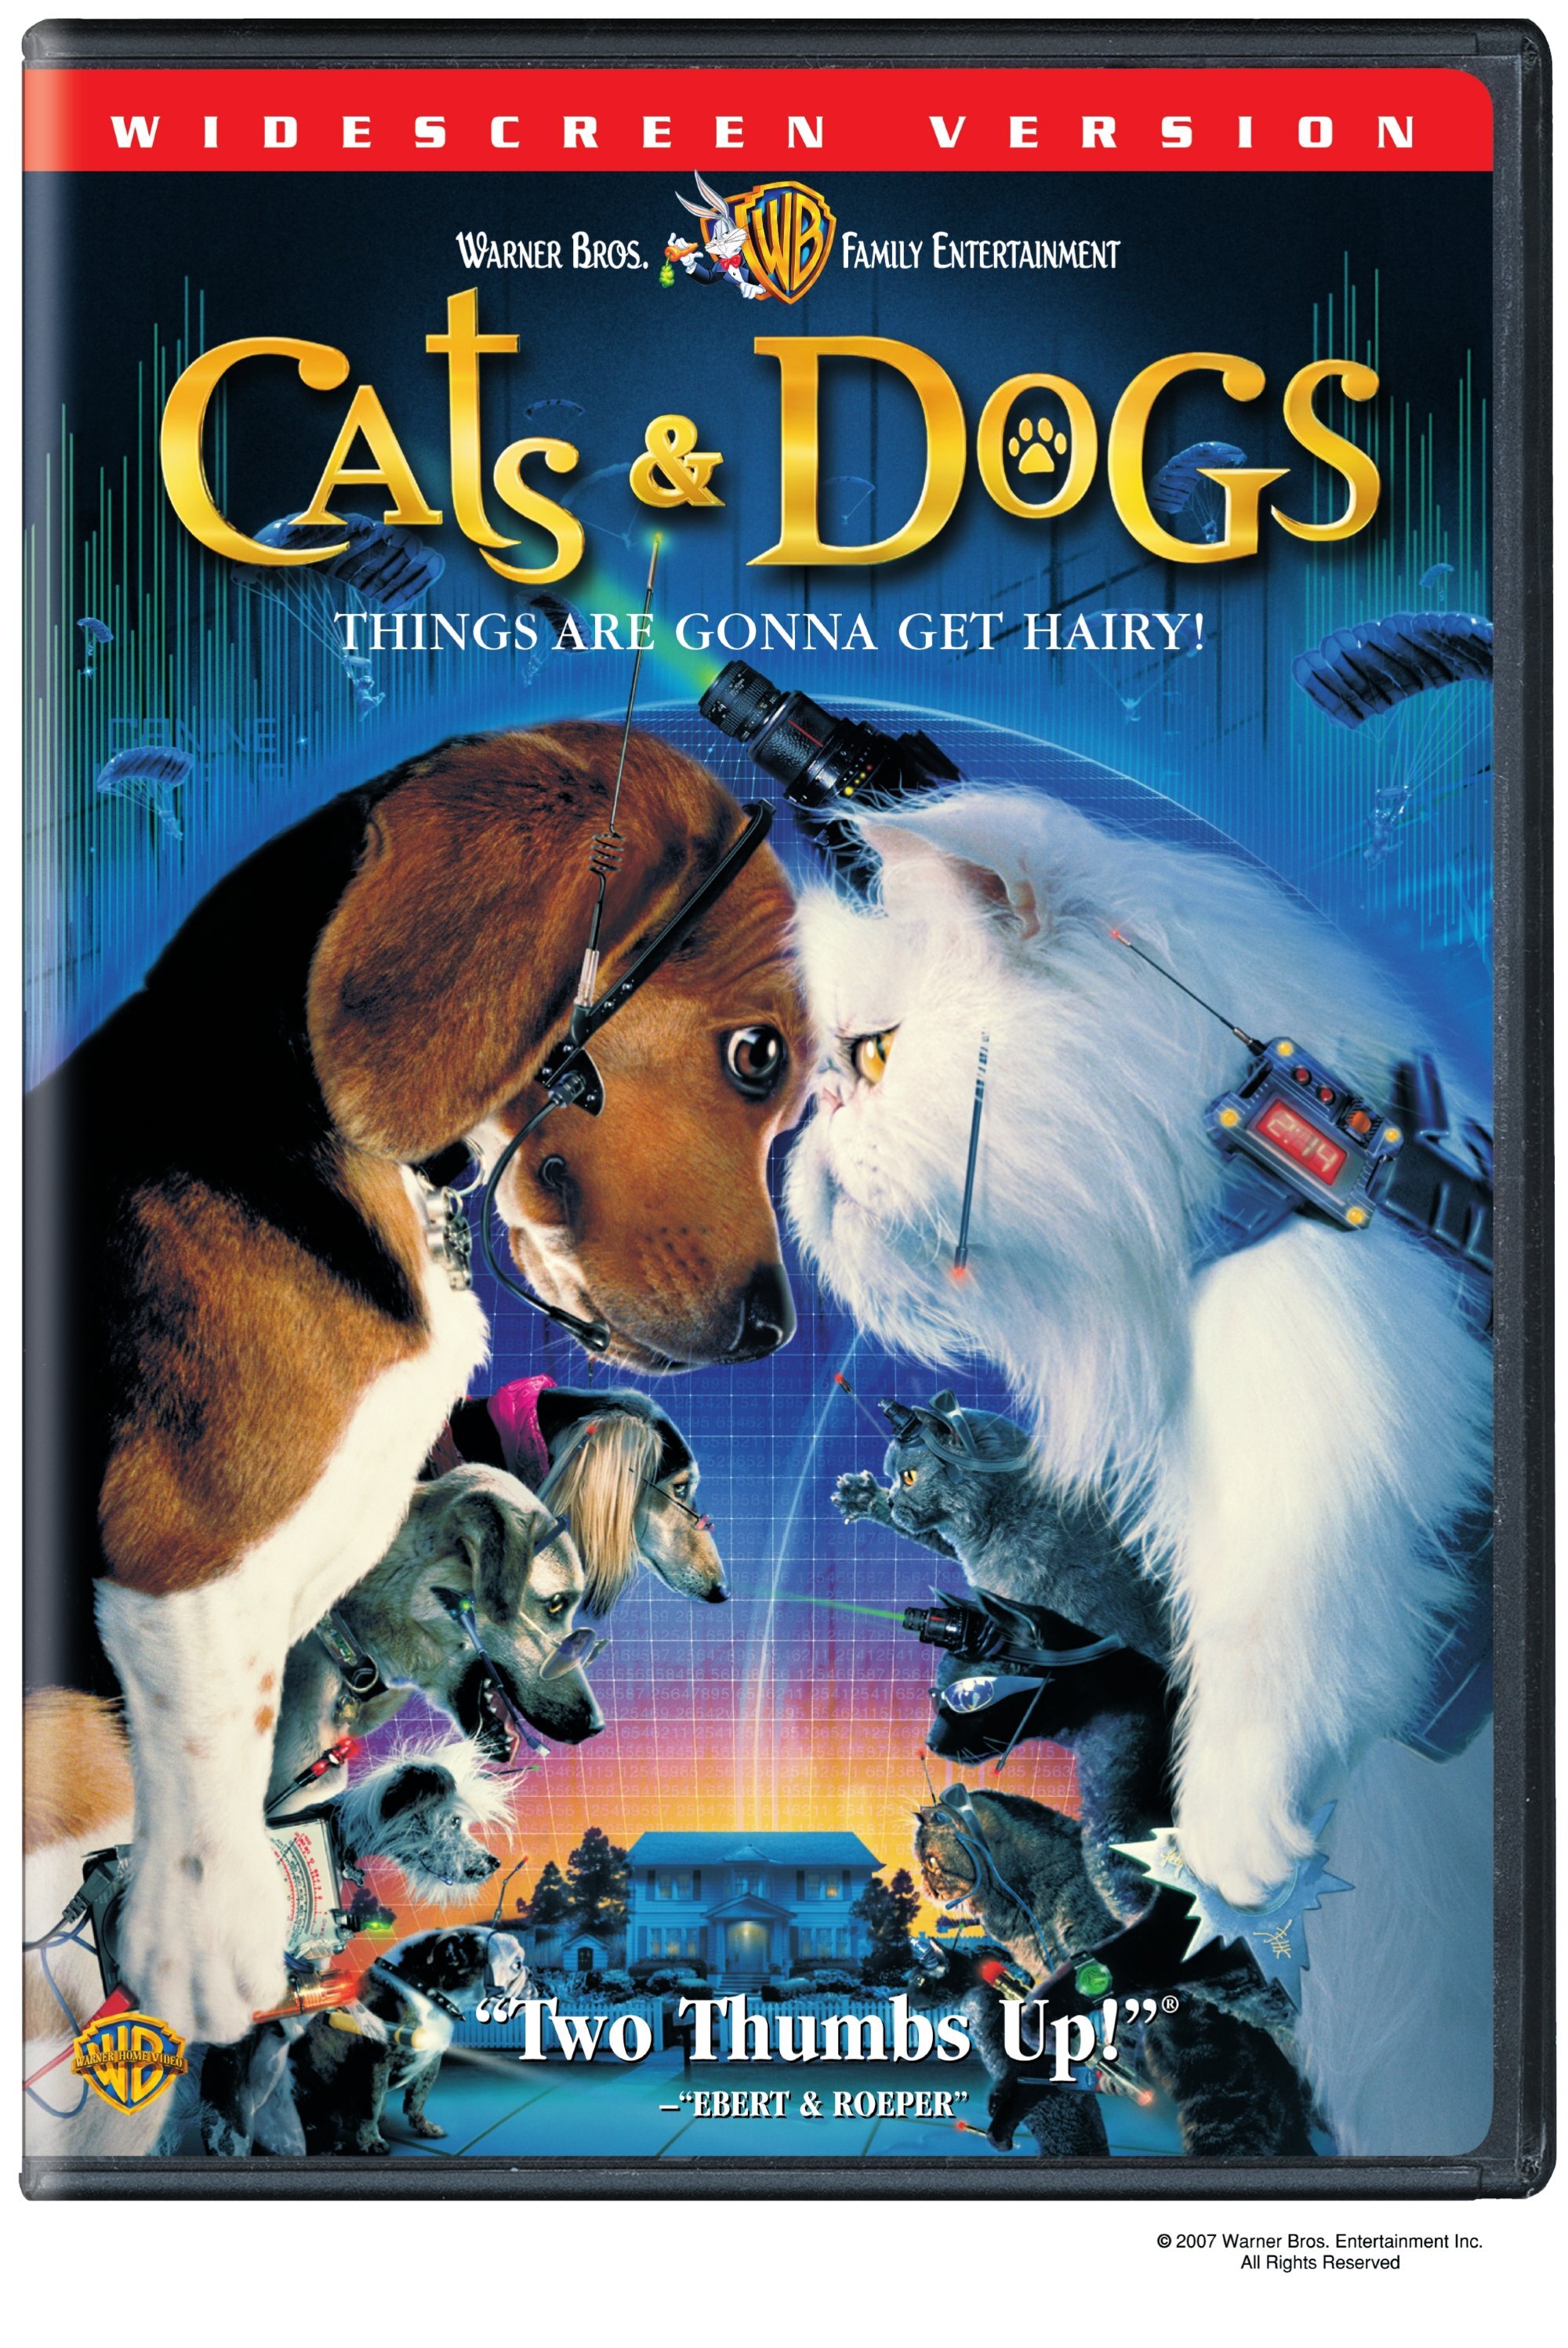 Cats And Dogs (DVD Widescreen New Box Art) - DVD [ 1985 ]  - Comedy Movies On DVD - Movies On GRUV